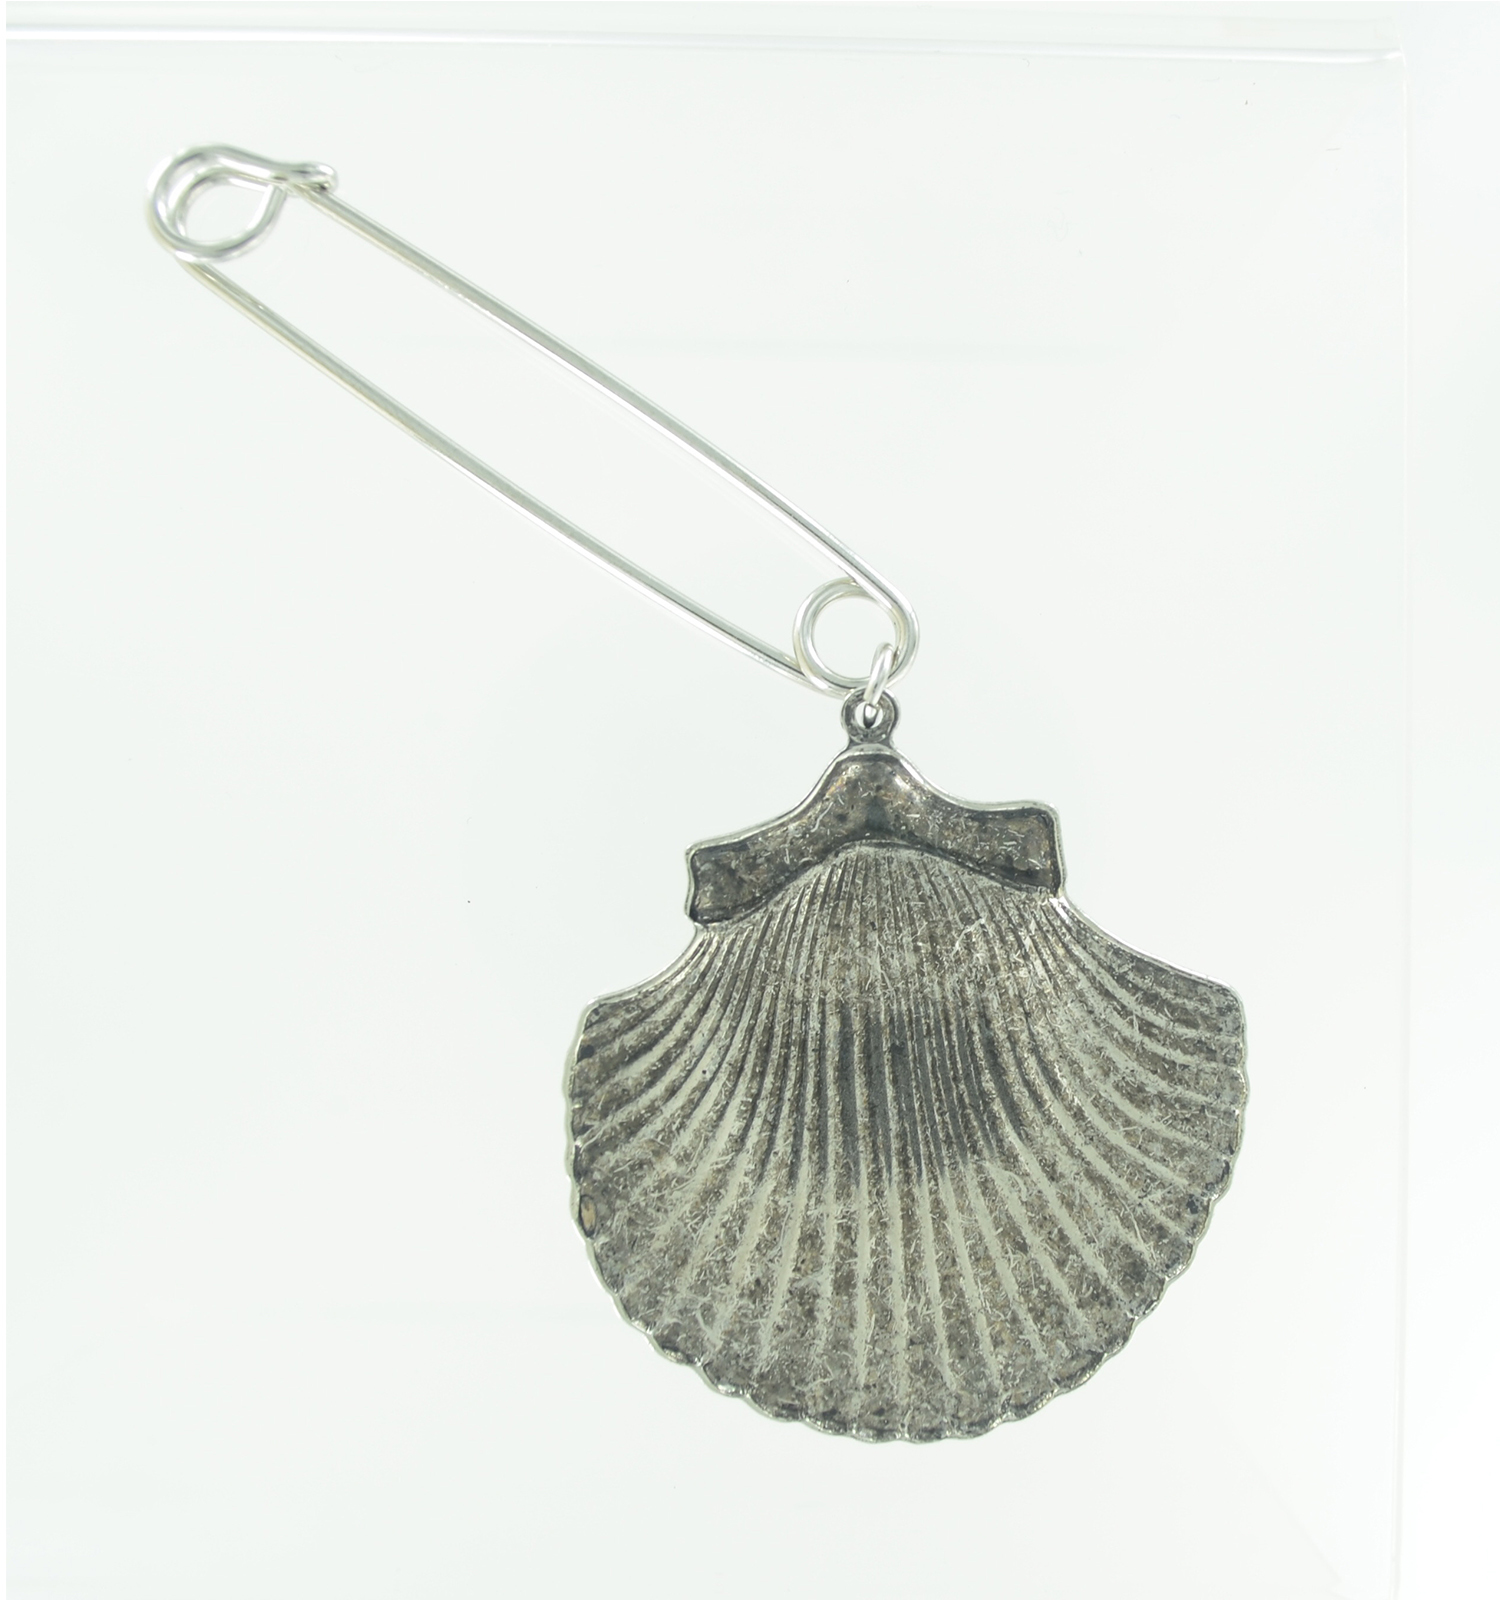 Safety Pin Brooch Cockle Sea Shell End Charm Silver Tone USA Made 2